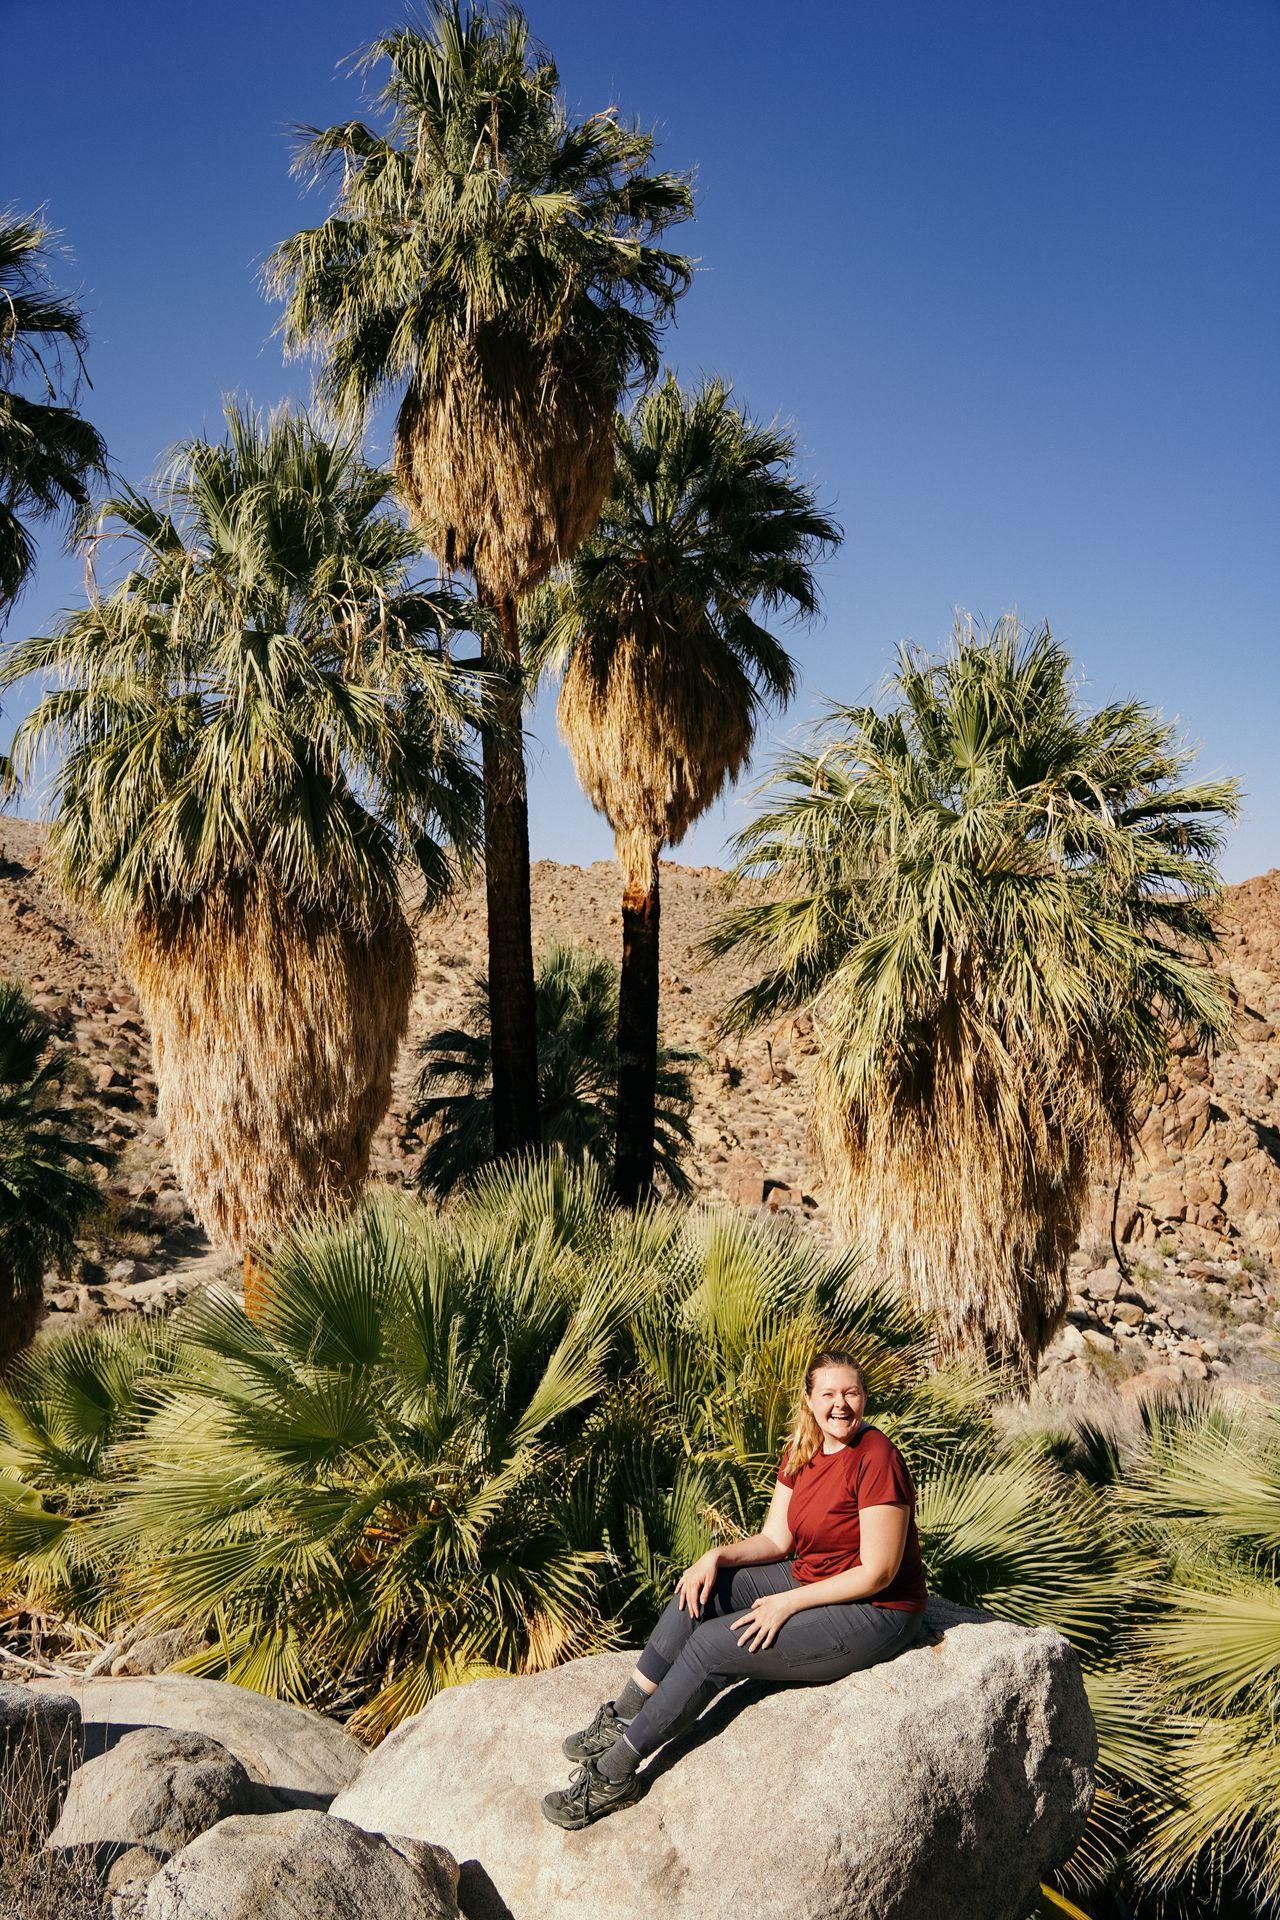 Lydia sitting on a boulder with several palm trees in the background.